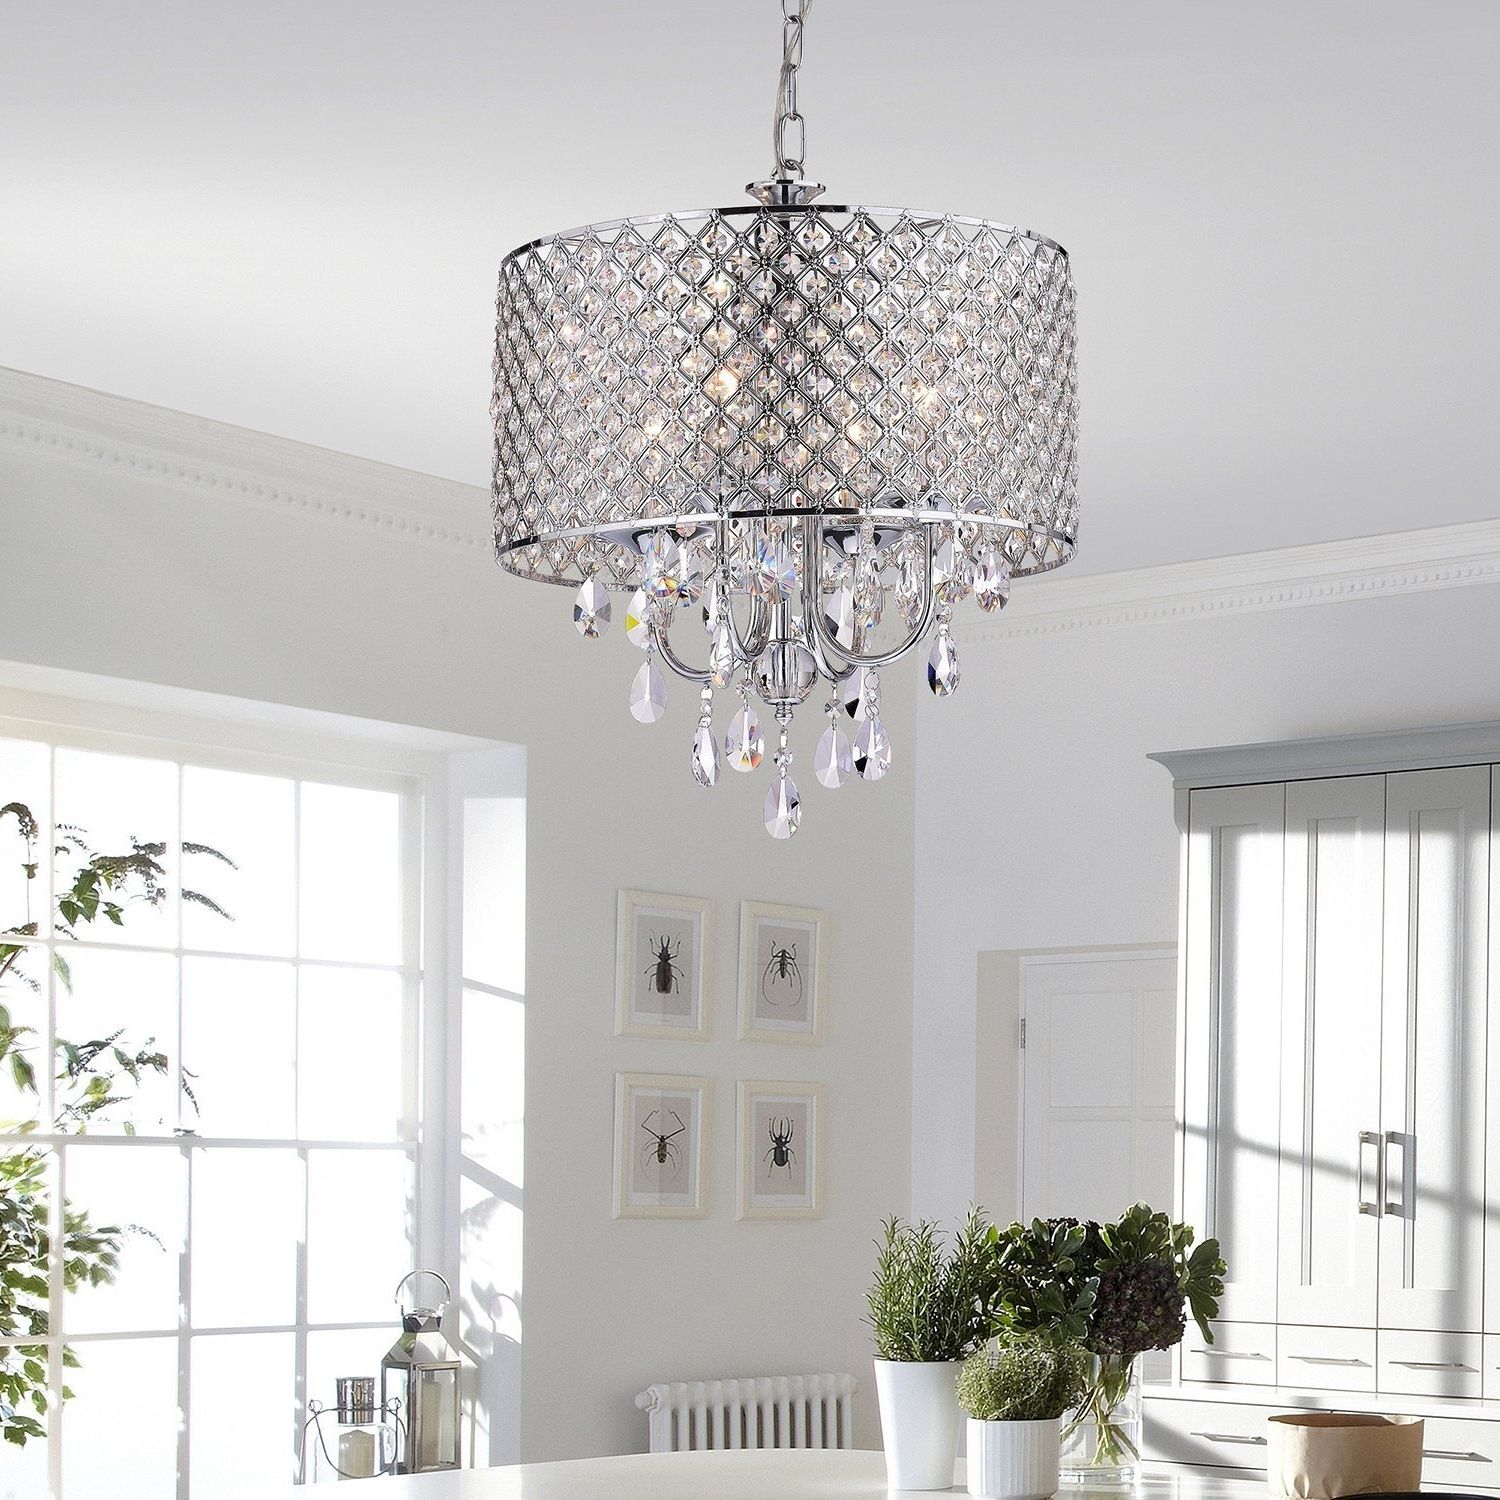 Famous Edvivi Epg801ch Chrome Finish Drum Shade 4 Light Crystal Chandelier Throughout 4 Light Crystal Chandeliers (View 9 of 15)